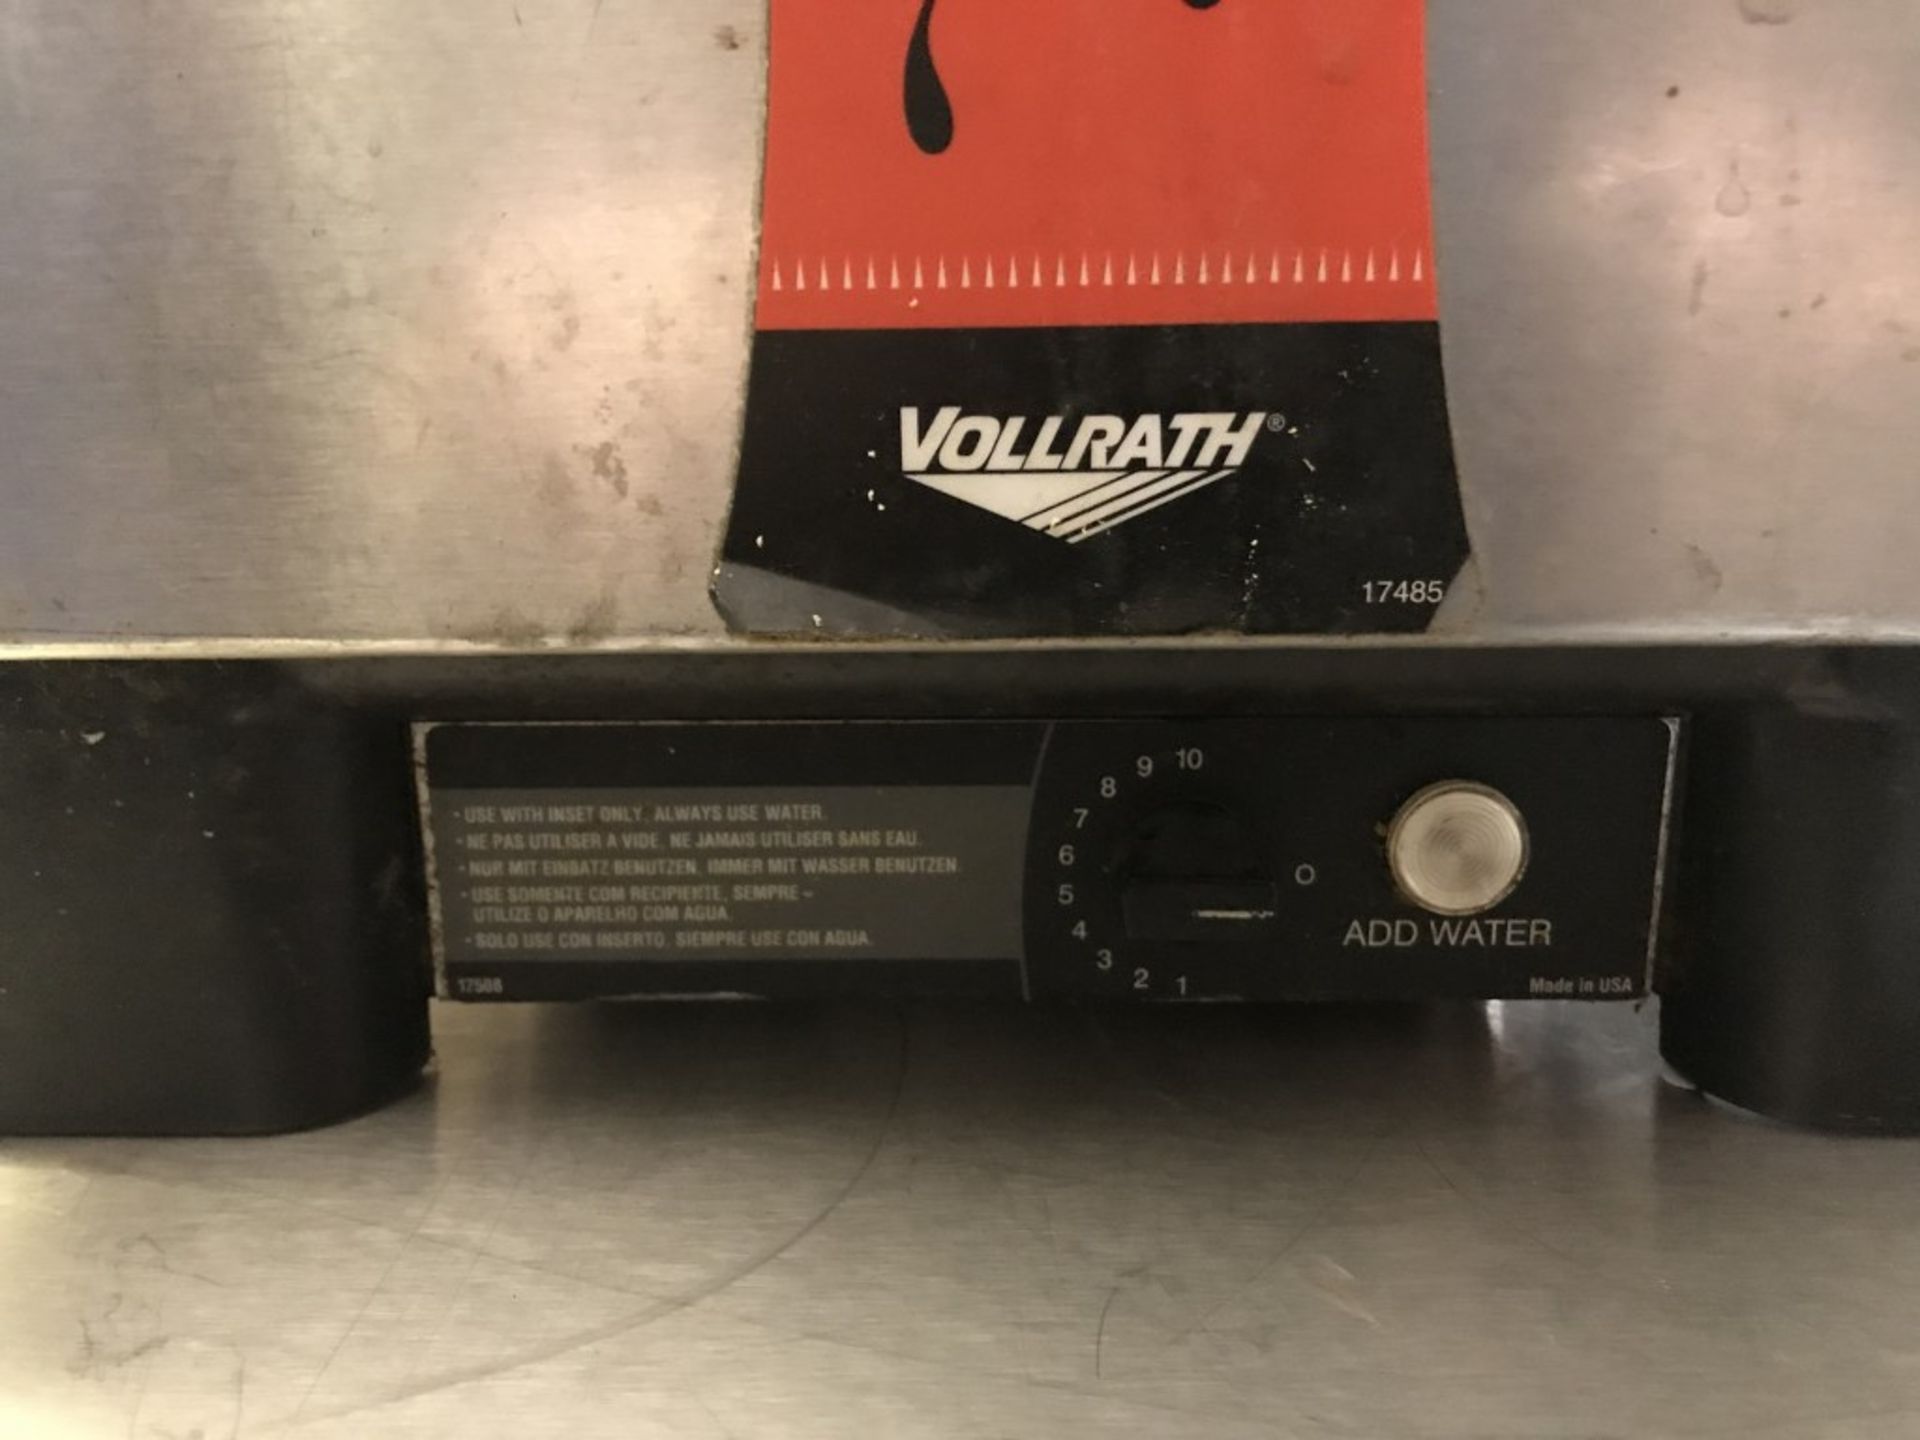 VOLLPATH CAYENNE - VARIABLE TEMPERATURE FOOD WARMER - MODEL # 1001 - Image 2 of 3